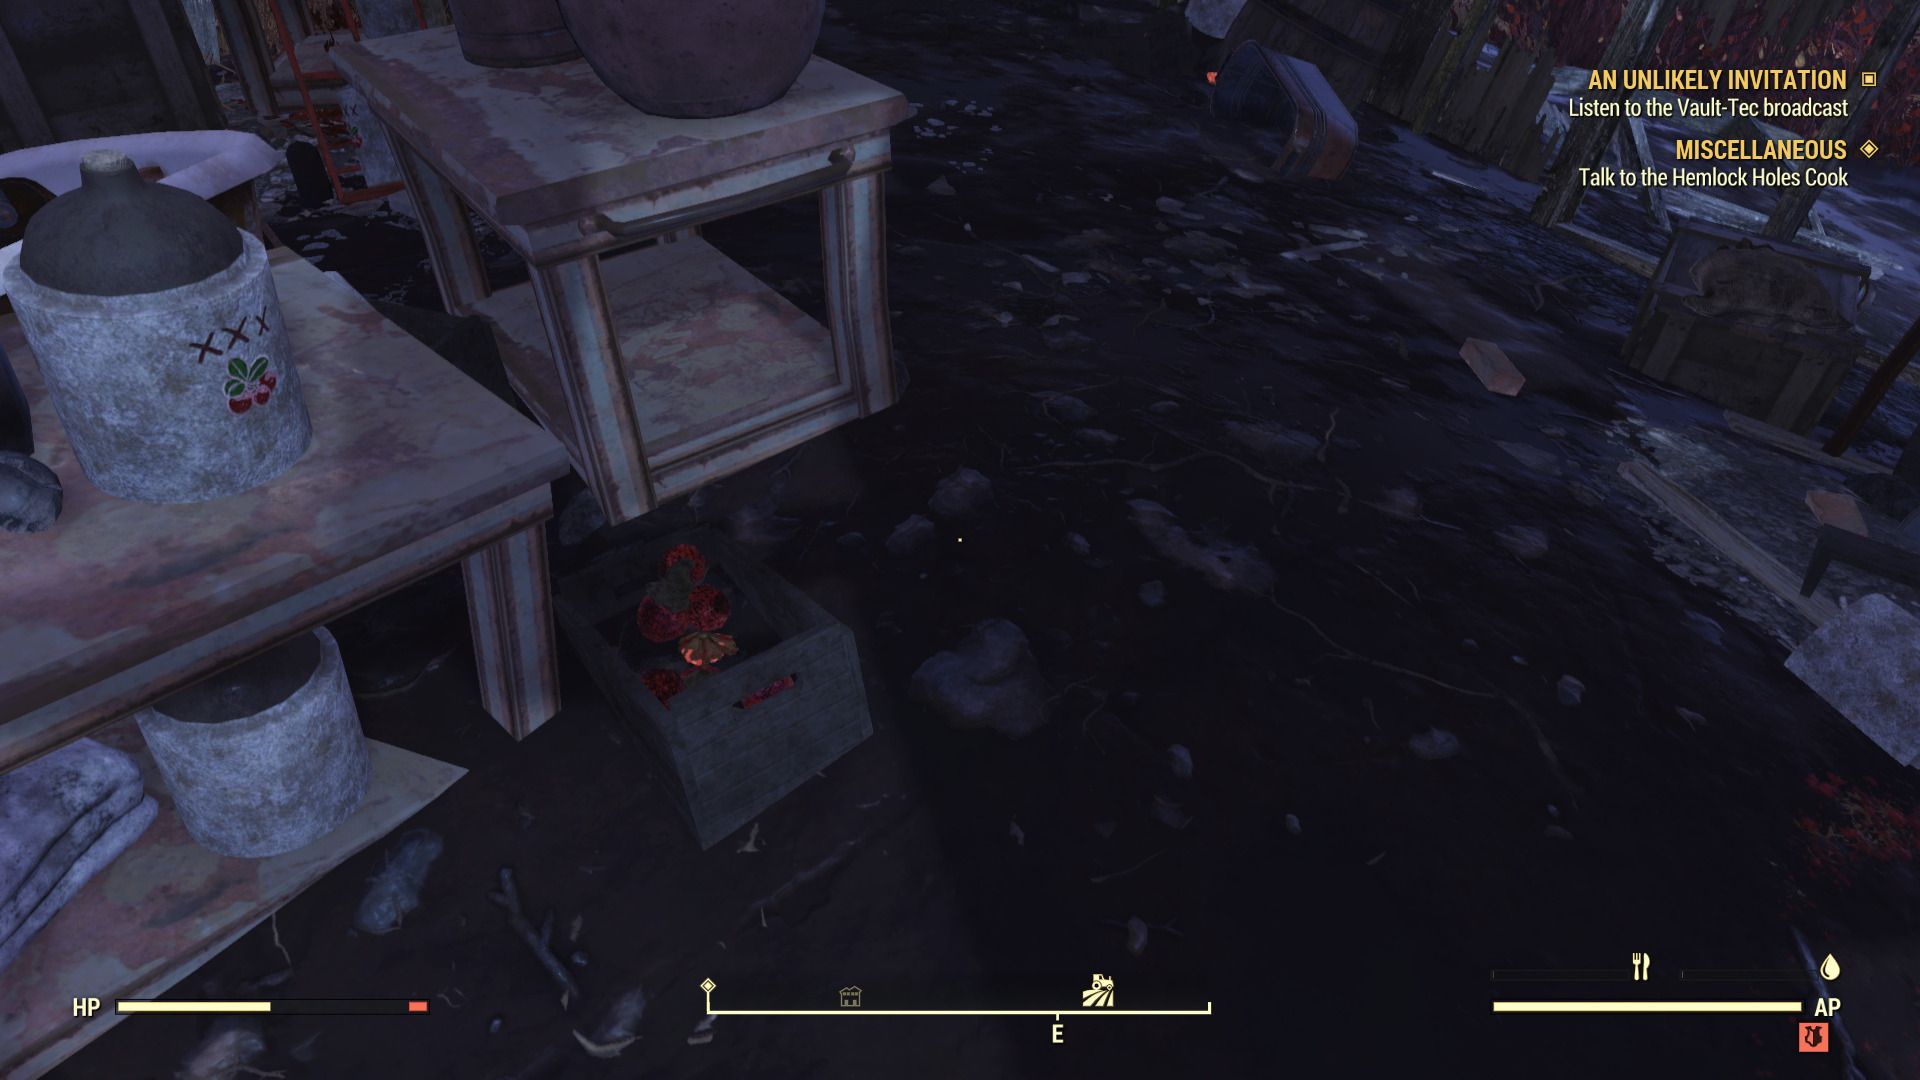 Image of some cranberries in Fallout 76